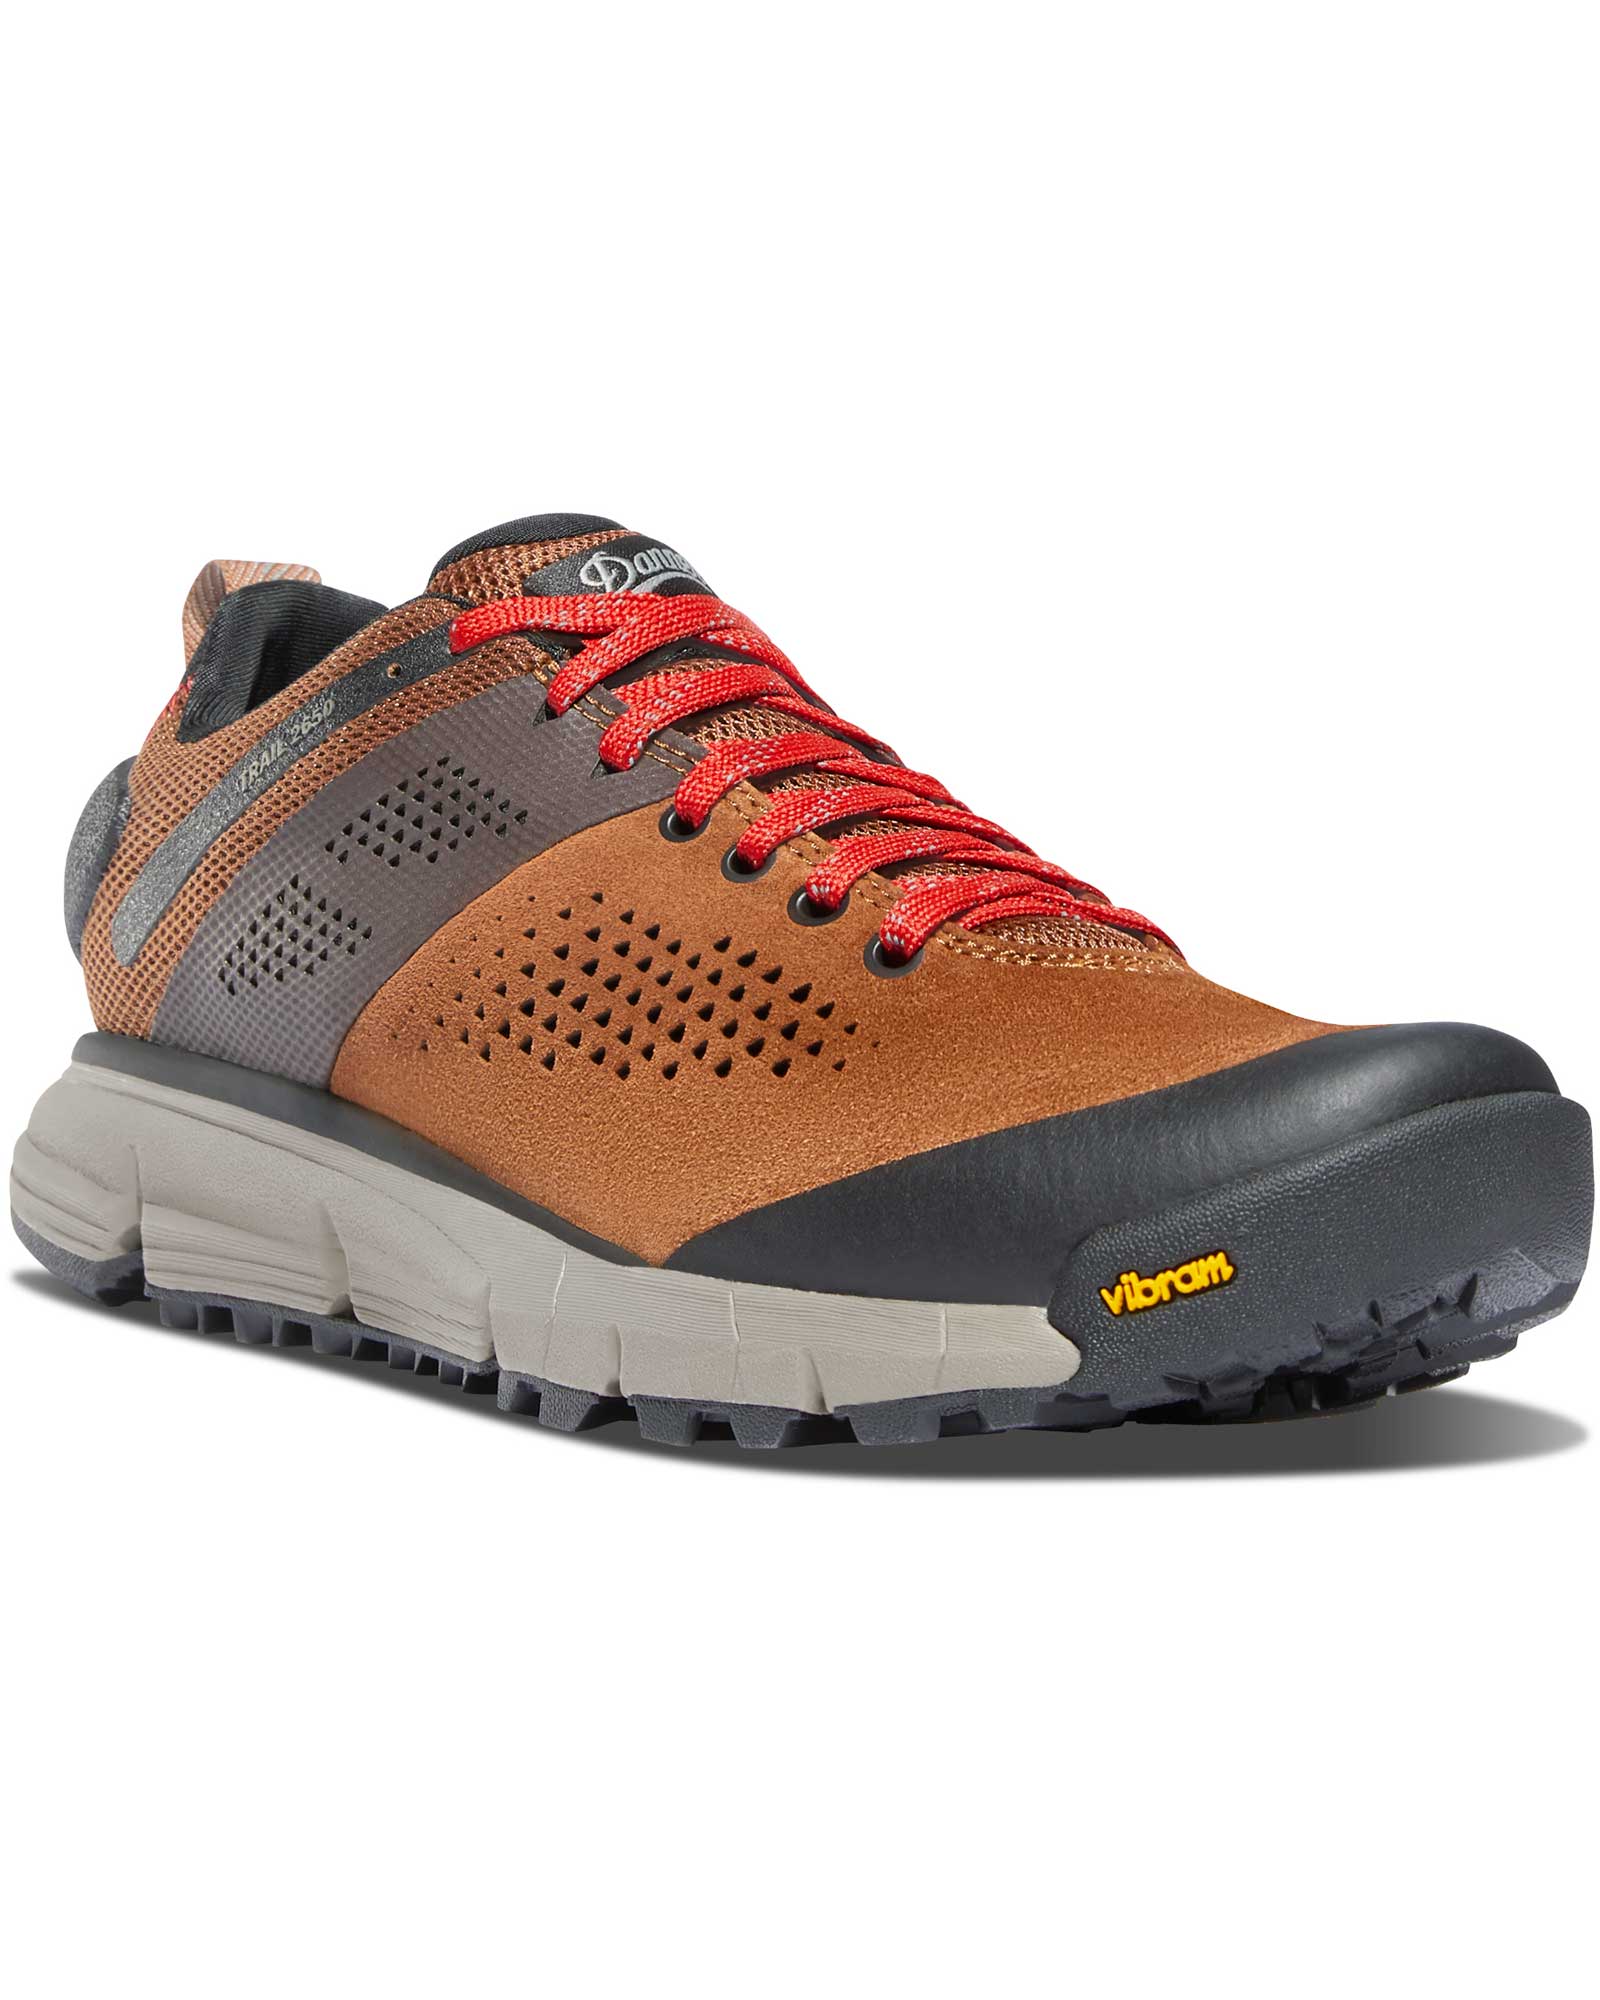 Danner Women’s Trail 2650 Trainers - Brown/Red UK 5